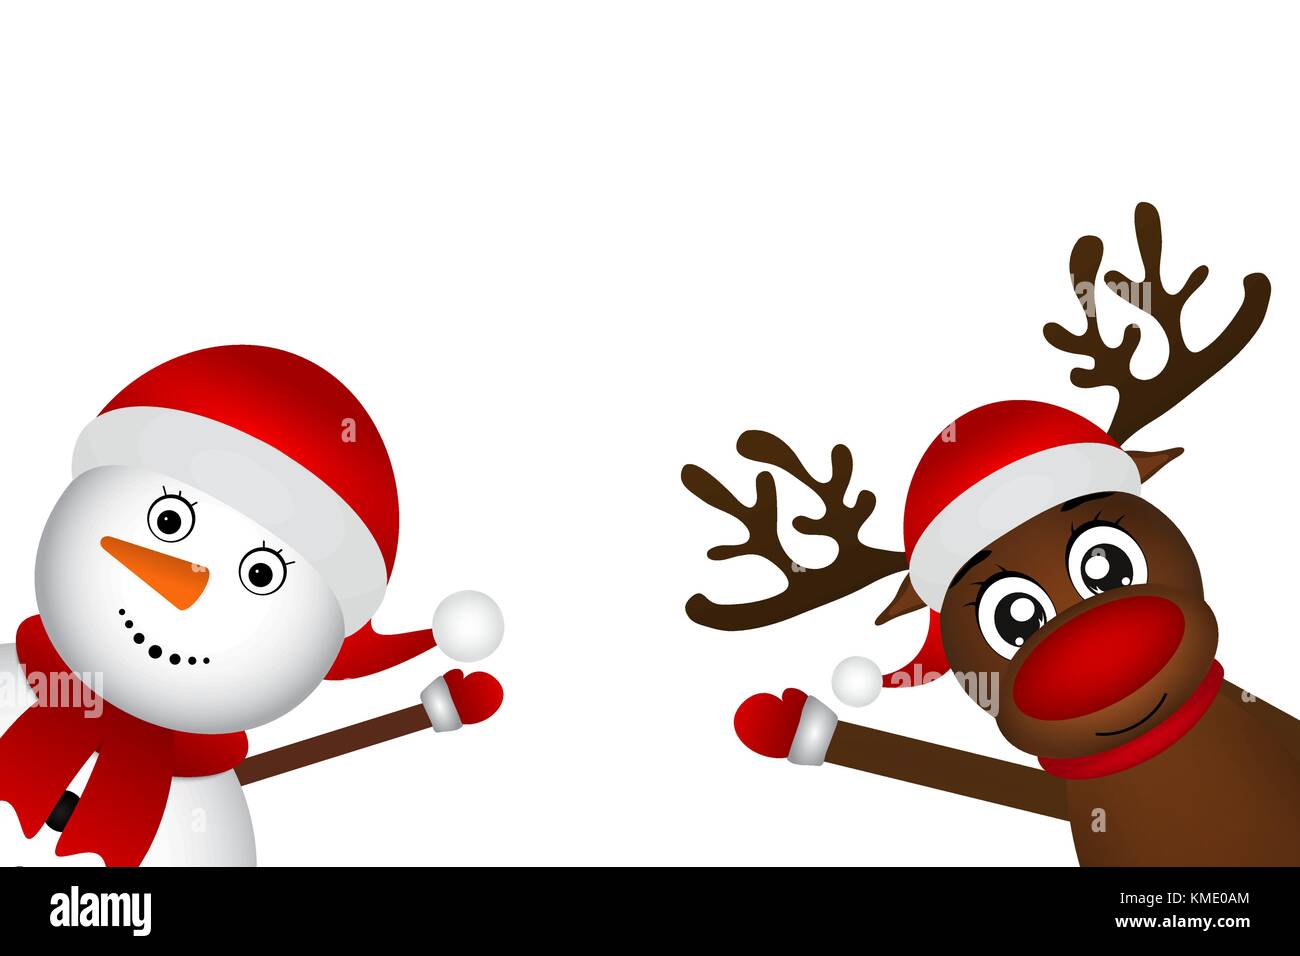 Snowman with reindeer standing on a white background Stock Vector